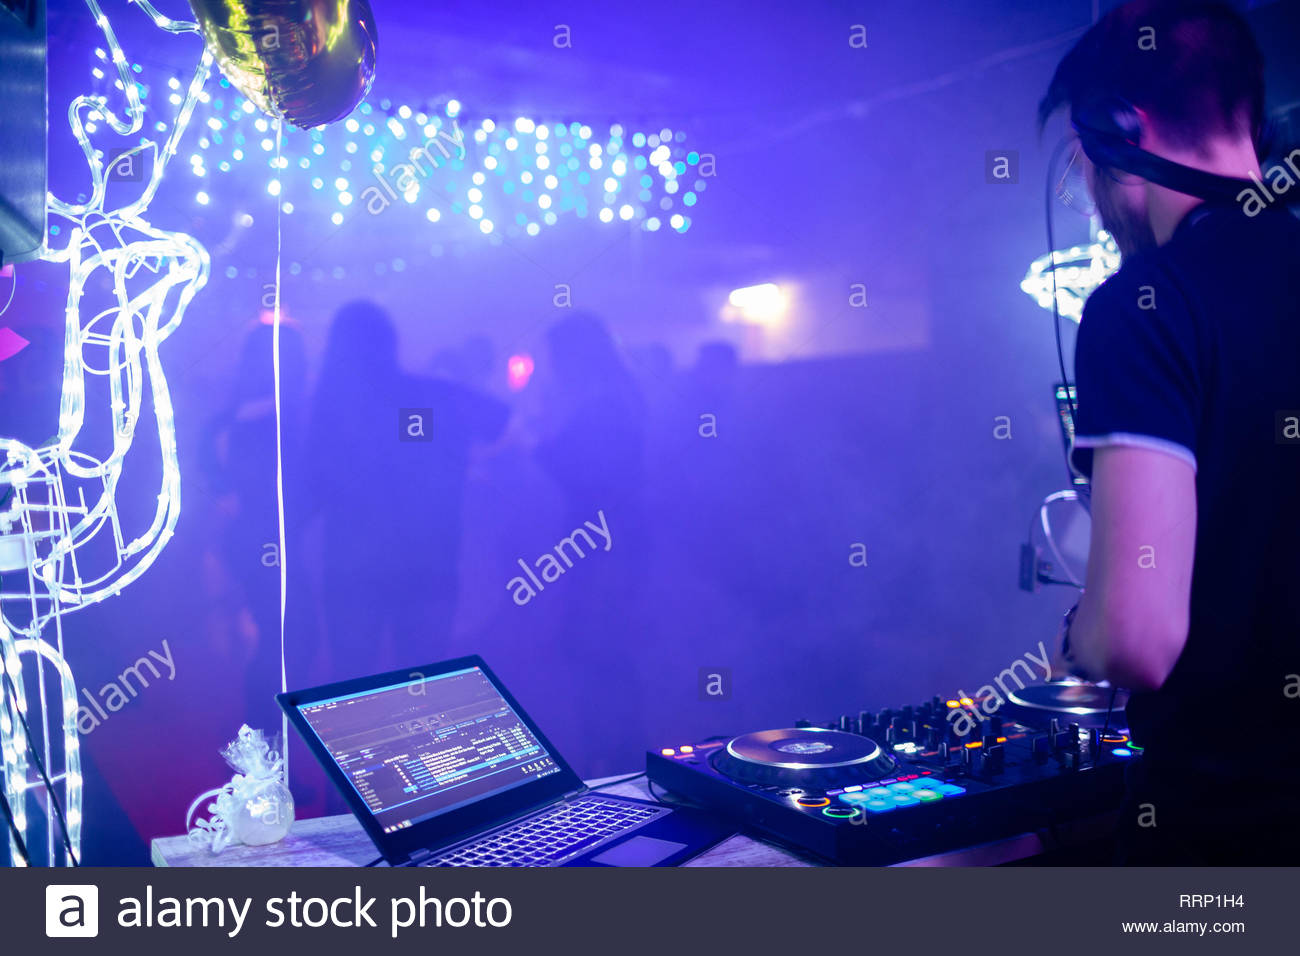 Dj At His Station With Dancefloor In The Background Stock Photo